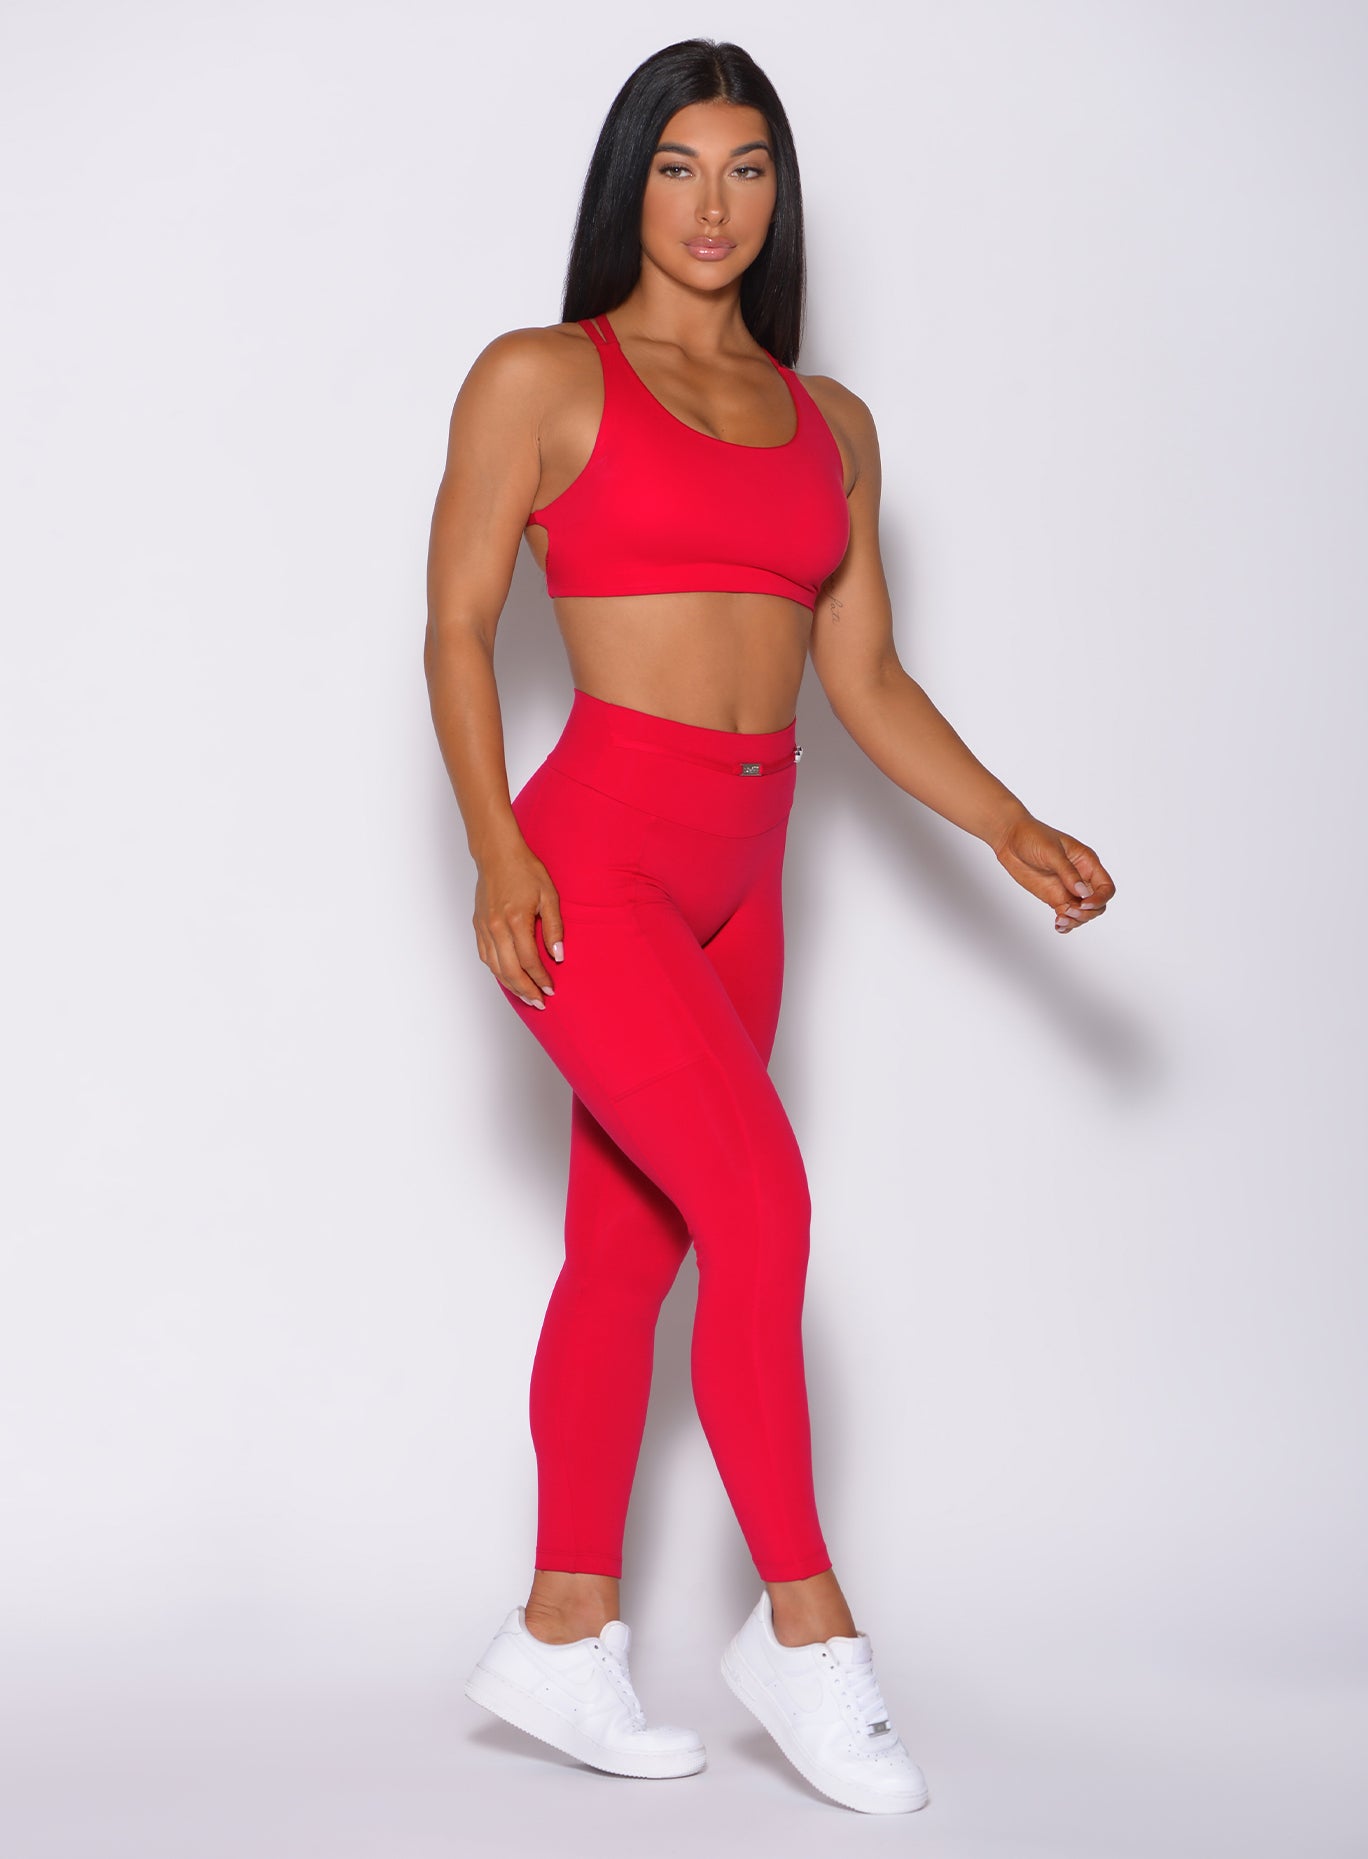 Right side profile view of a model facing forward wearing our red barbell sports bra and a matching leggings